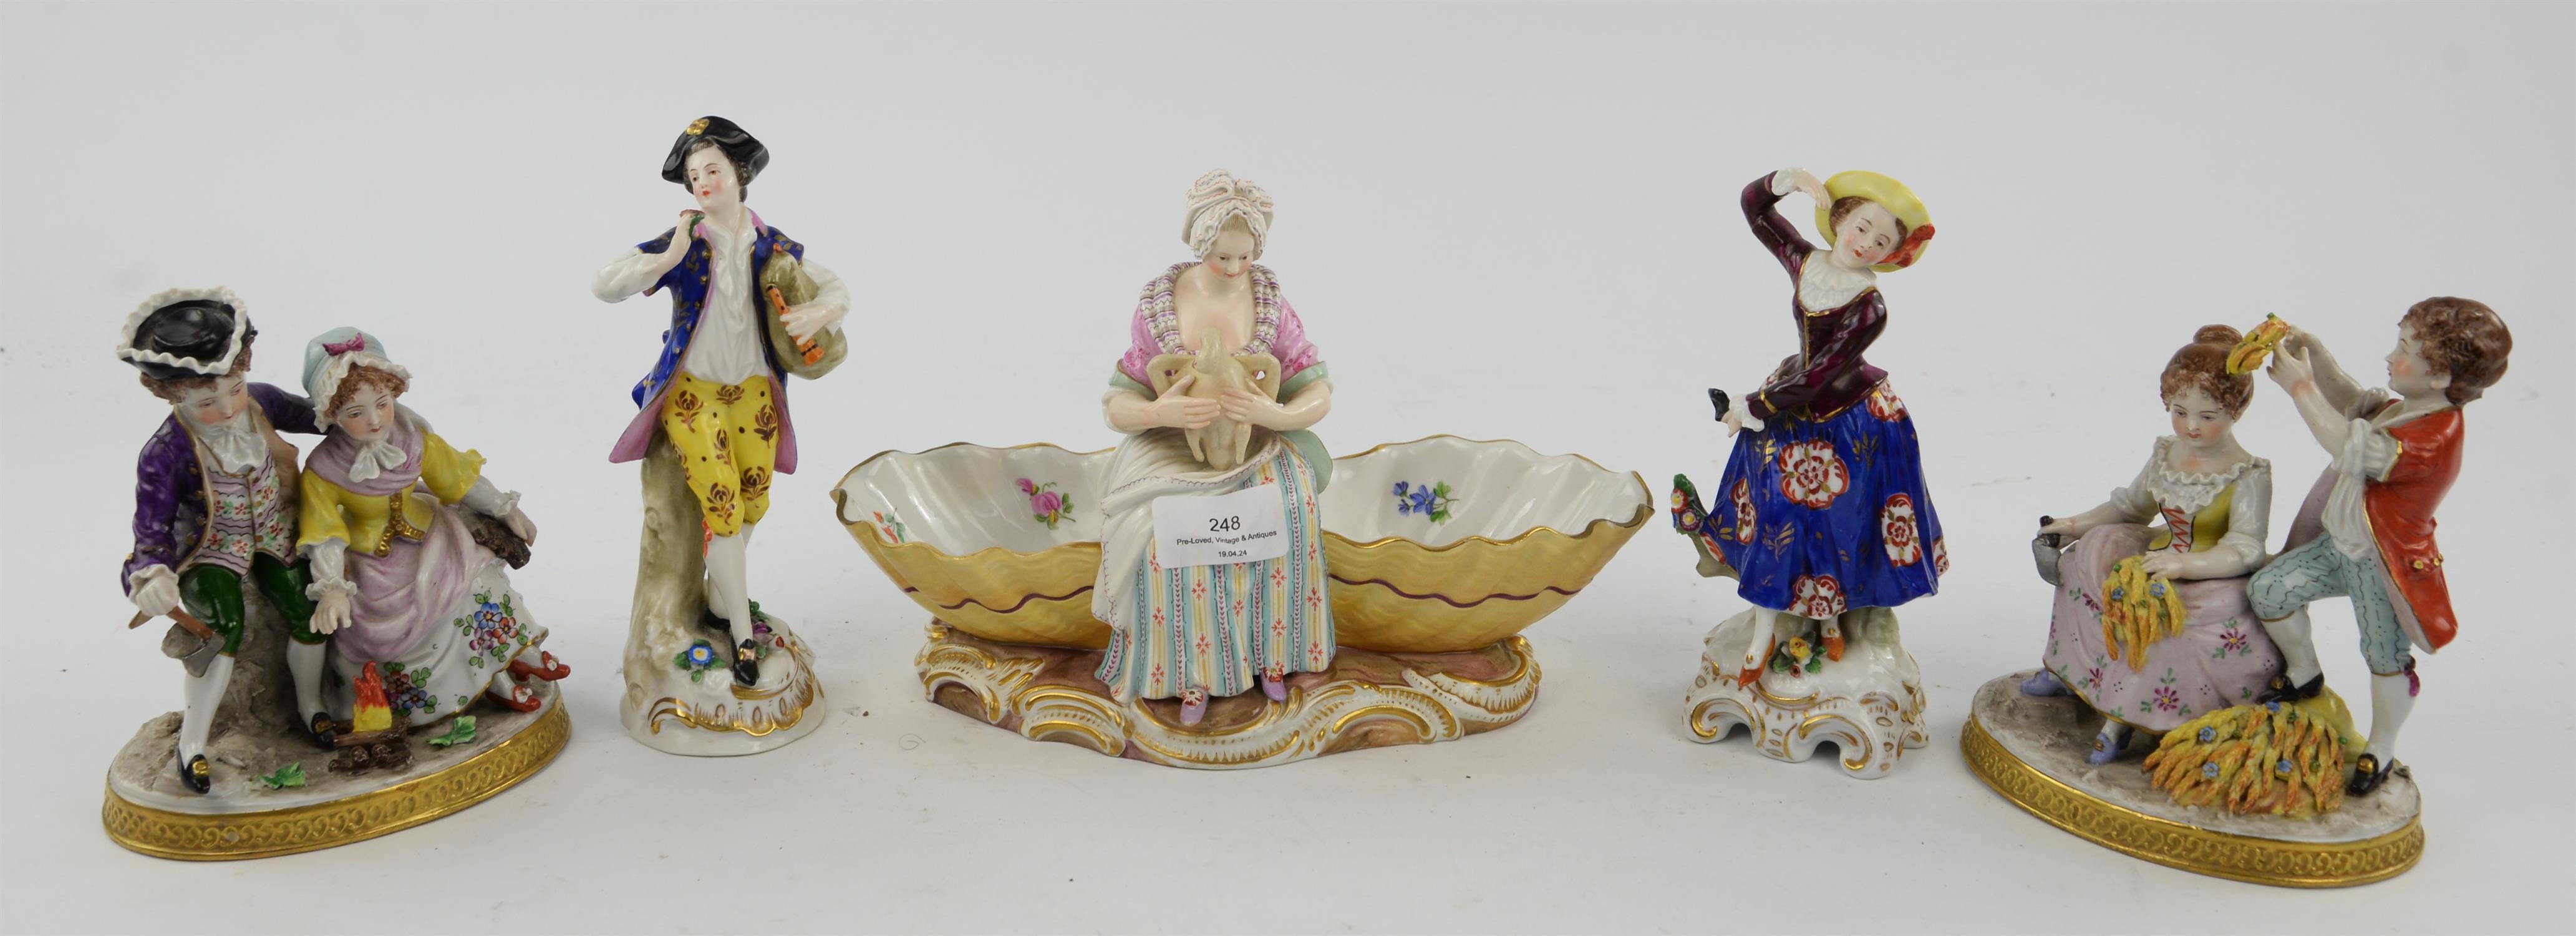 A Meissen porcelain salt cellar, modelled as woman holding a swan and flanked by a pair of floral